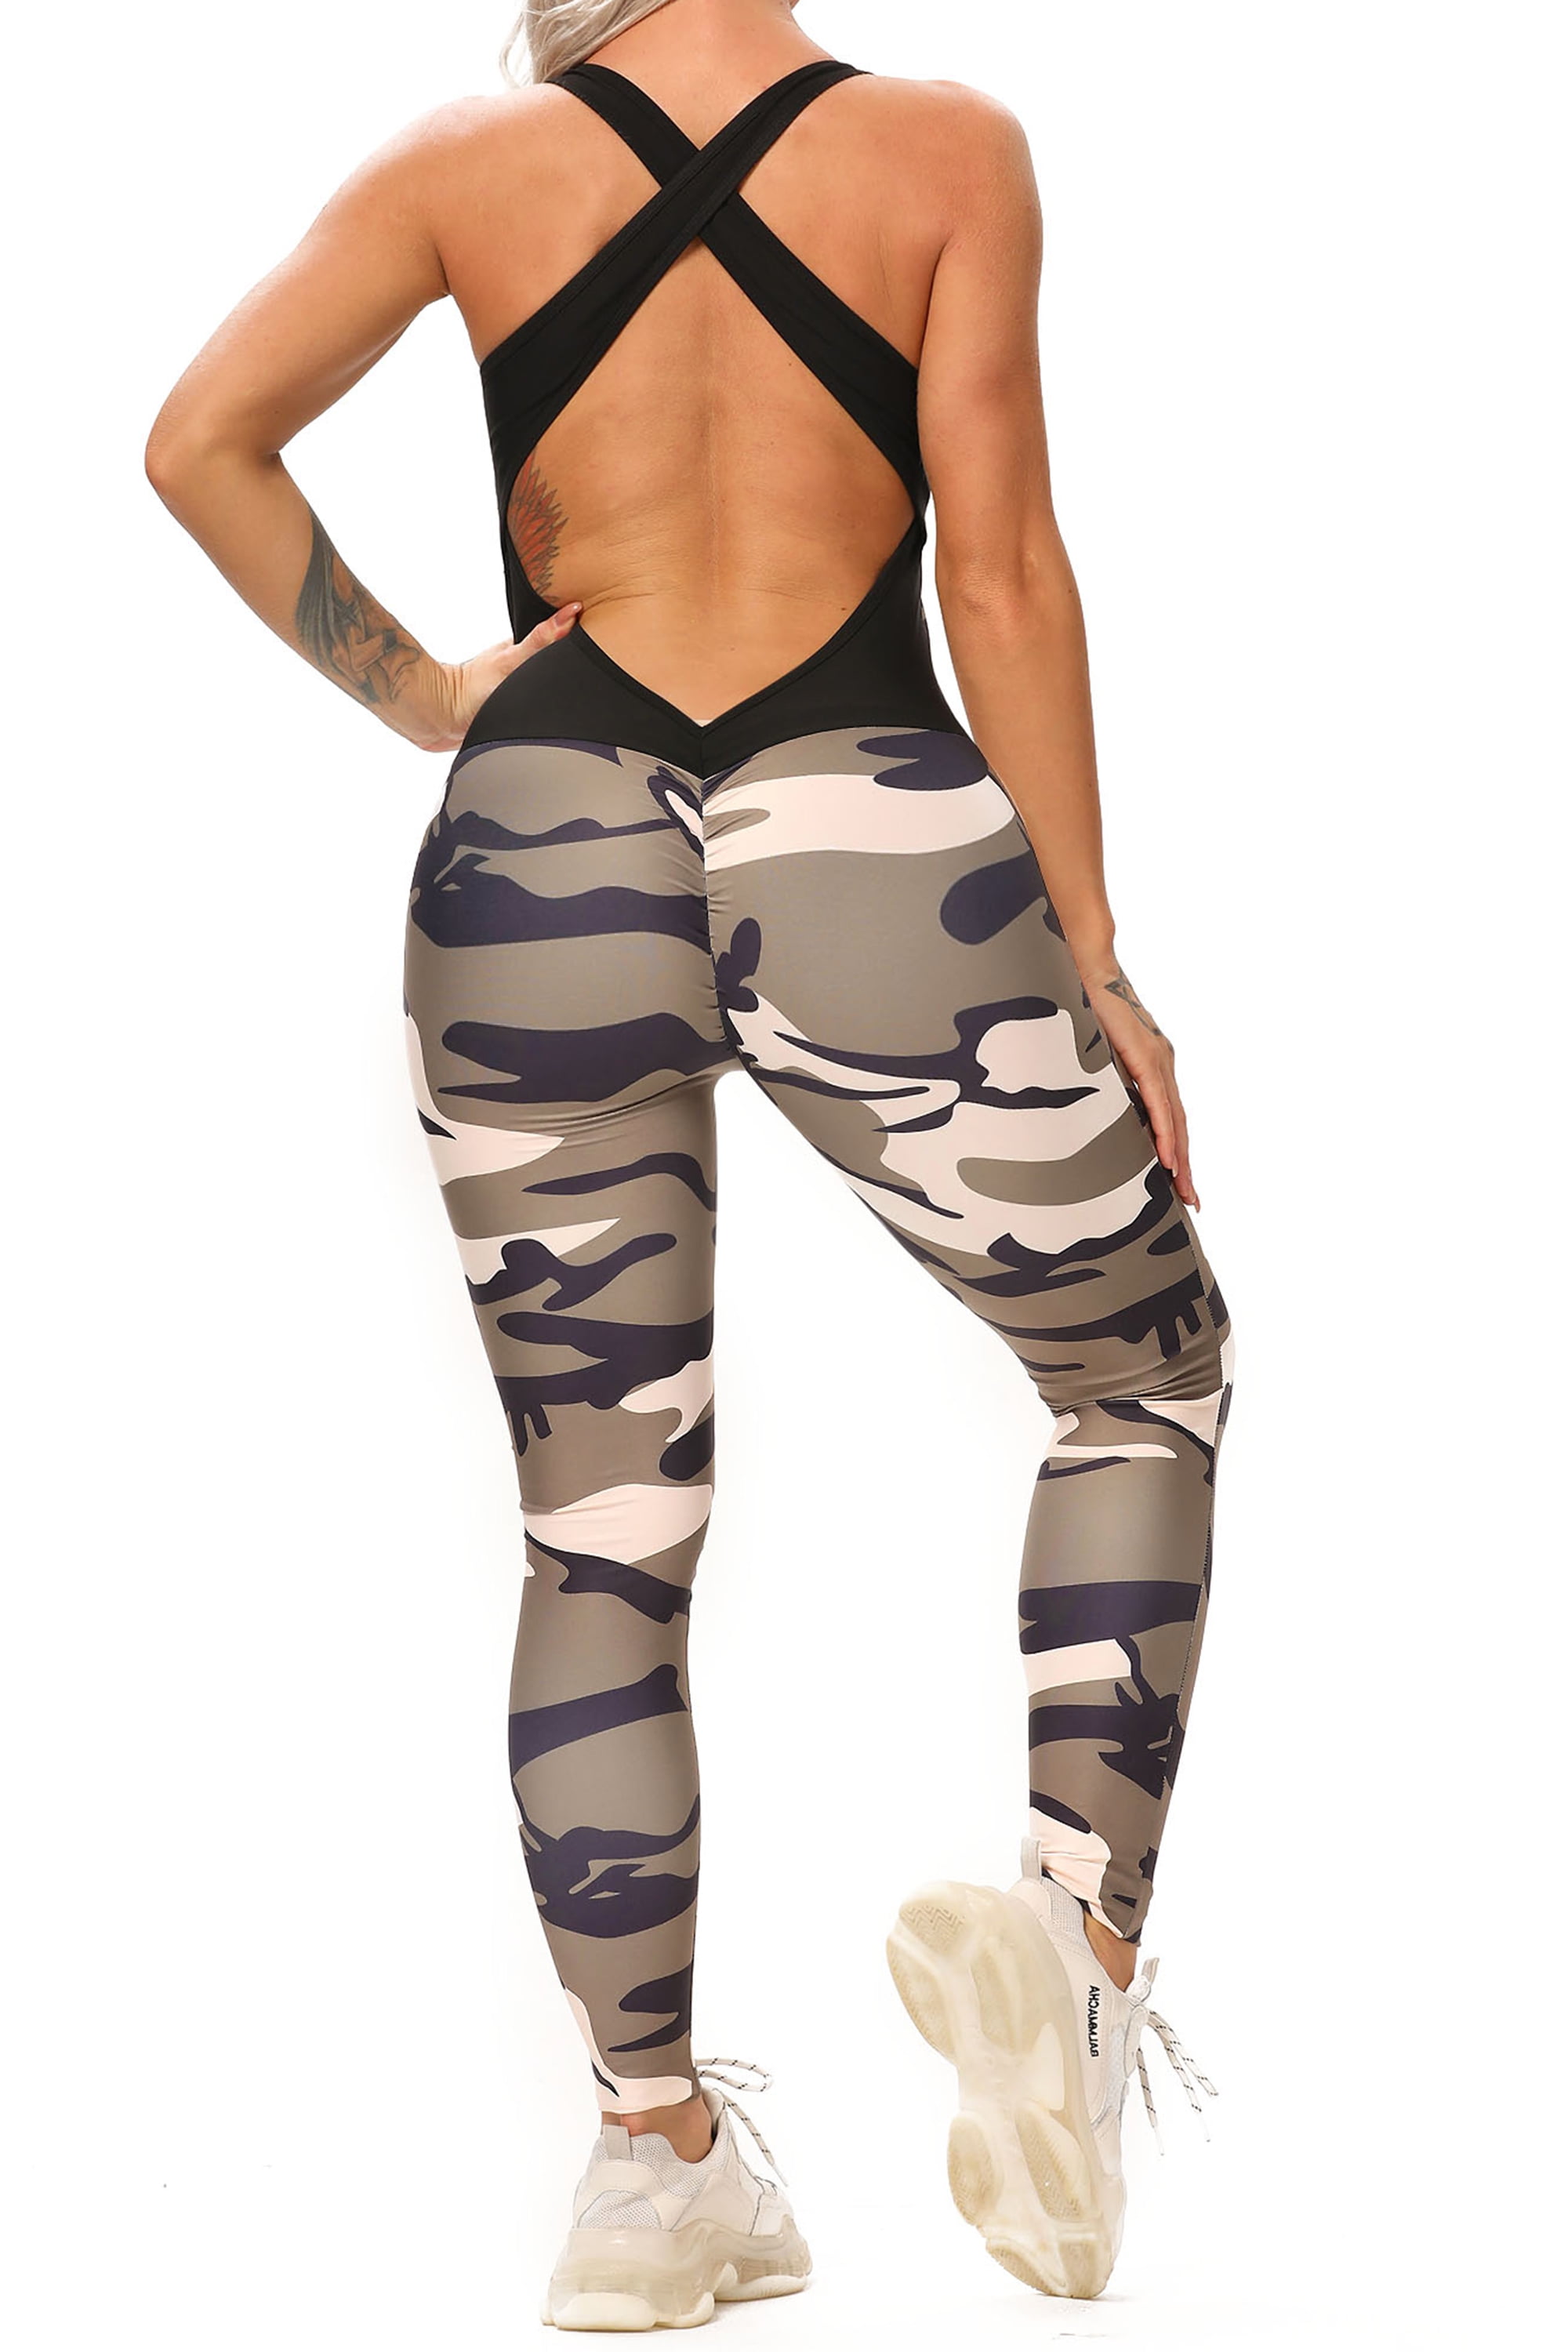 Womens Camouflage Jumpsuits Hooded Tank Top Long Pants Sports Bodysuit Playsuit